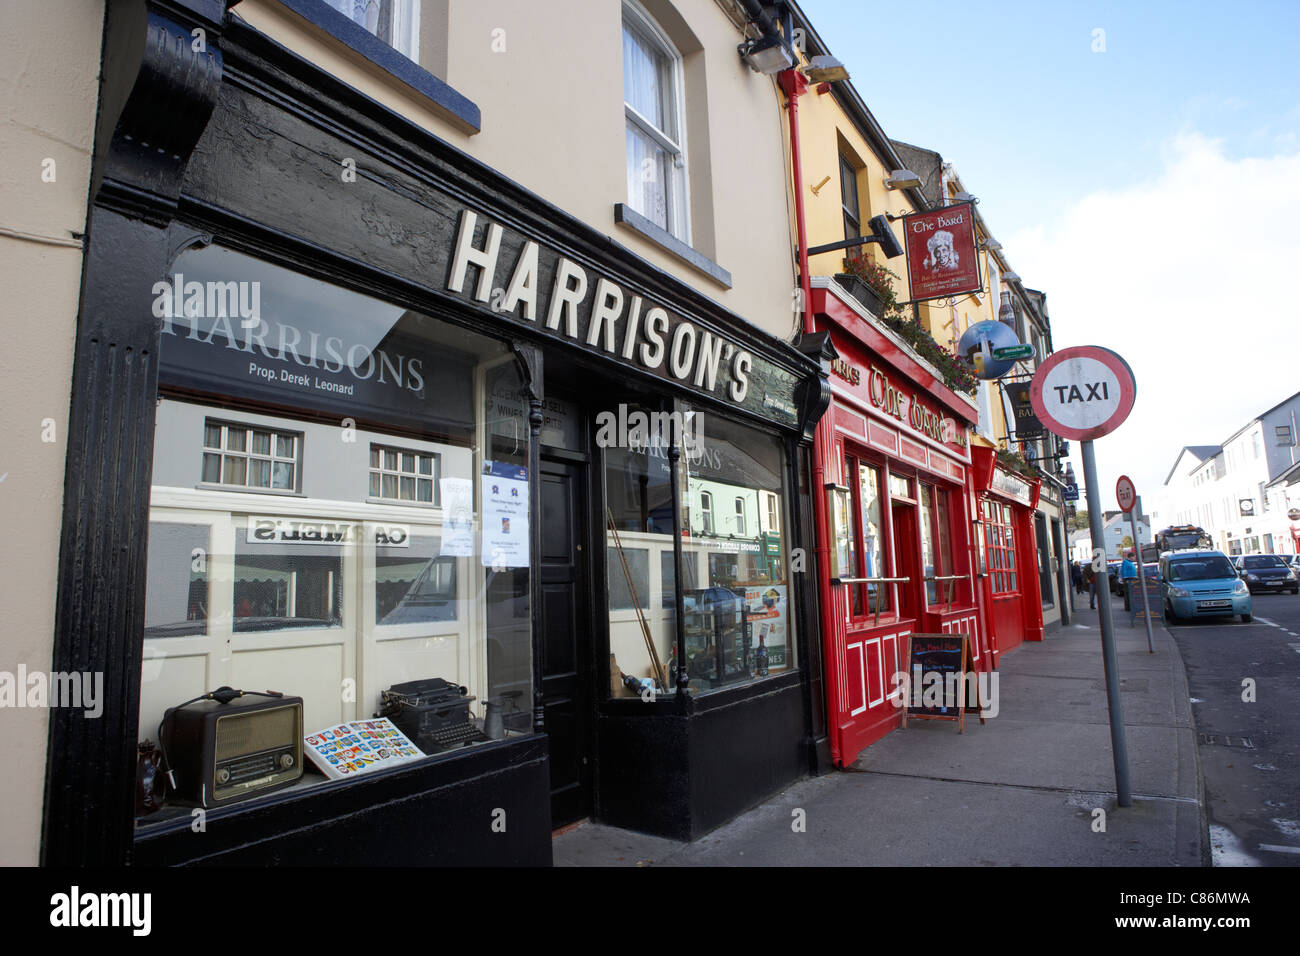 harrisons kitchen and bar